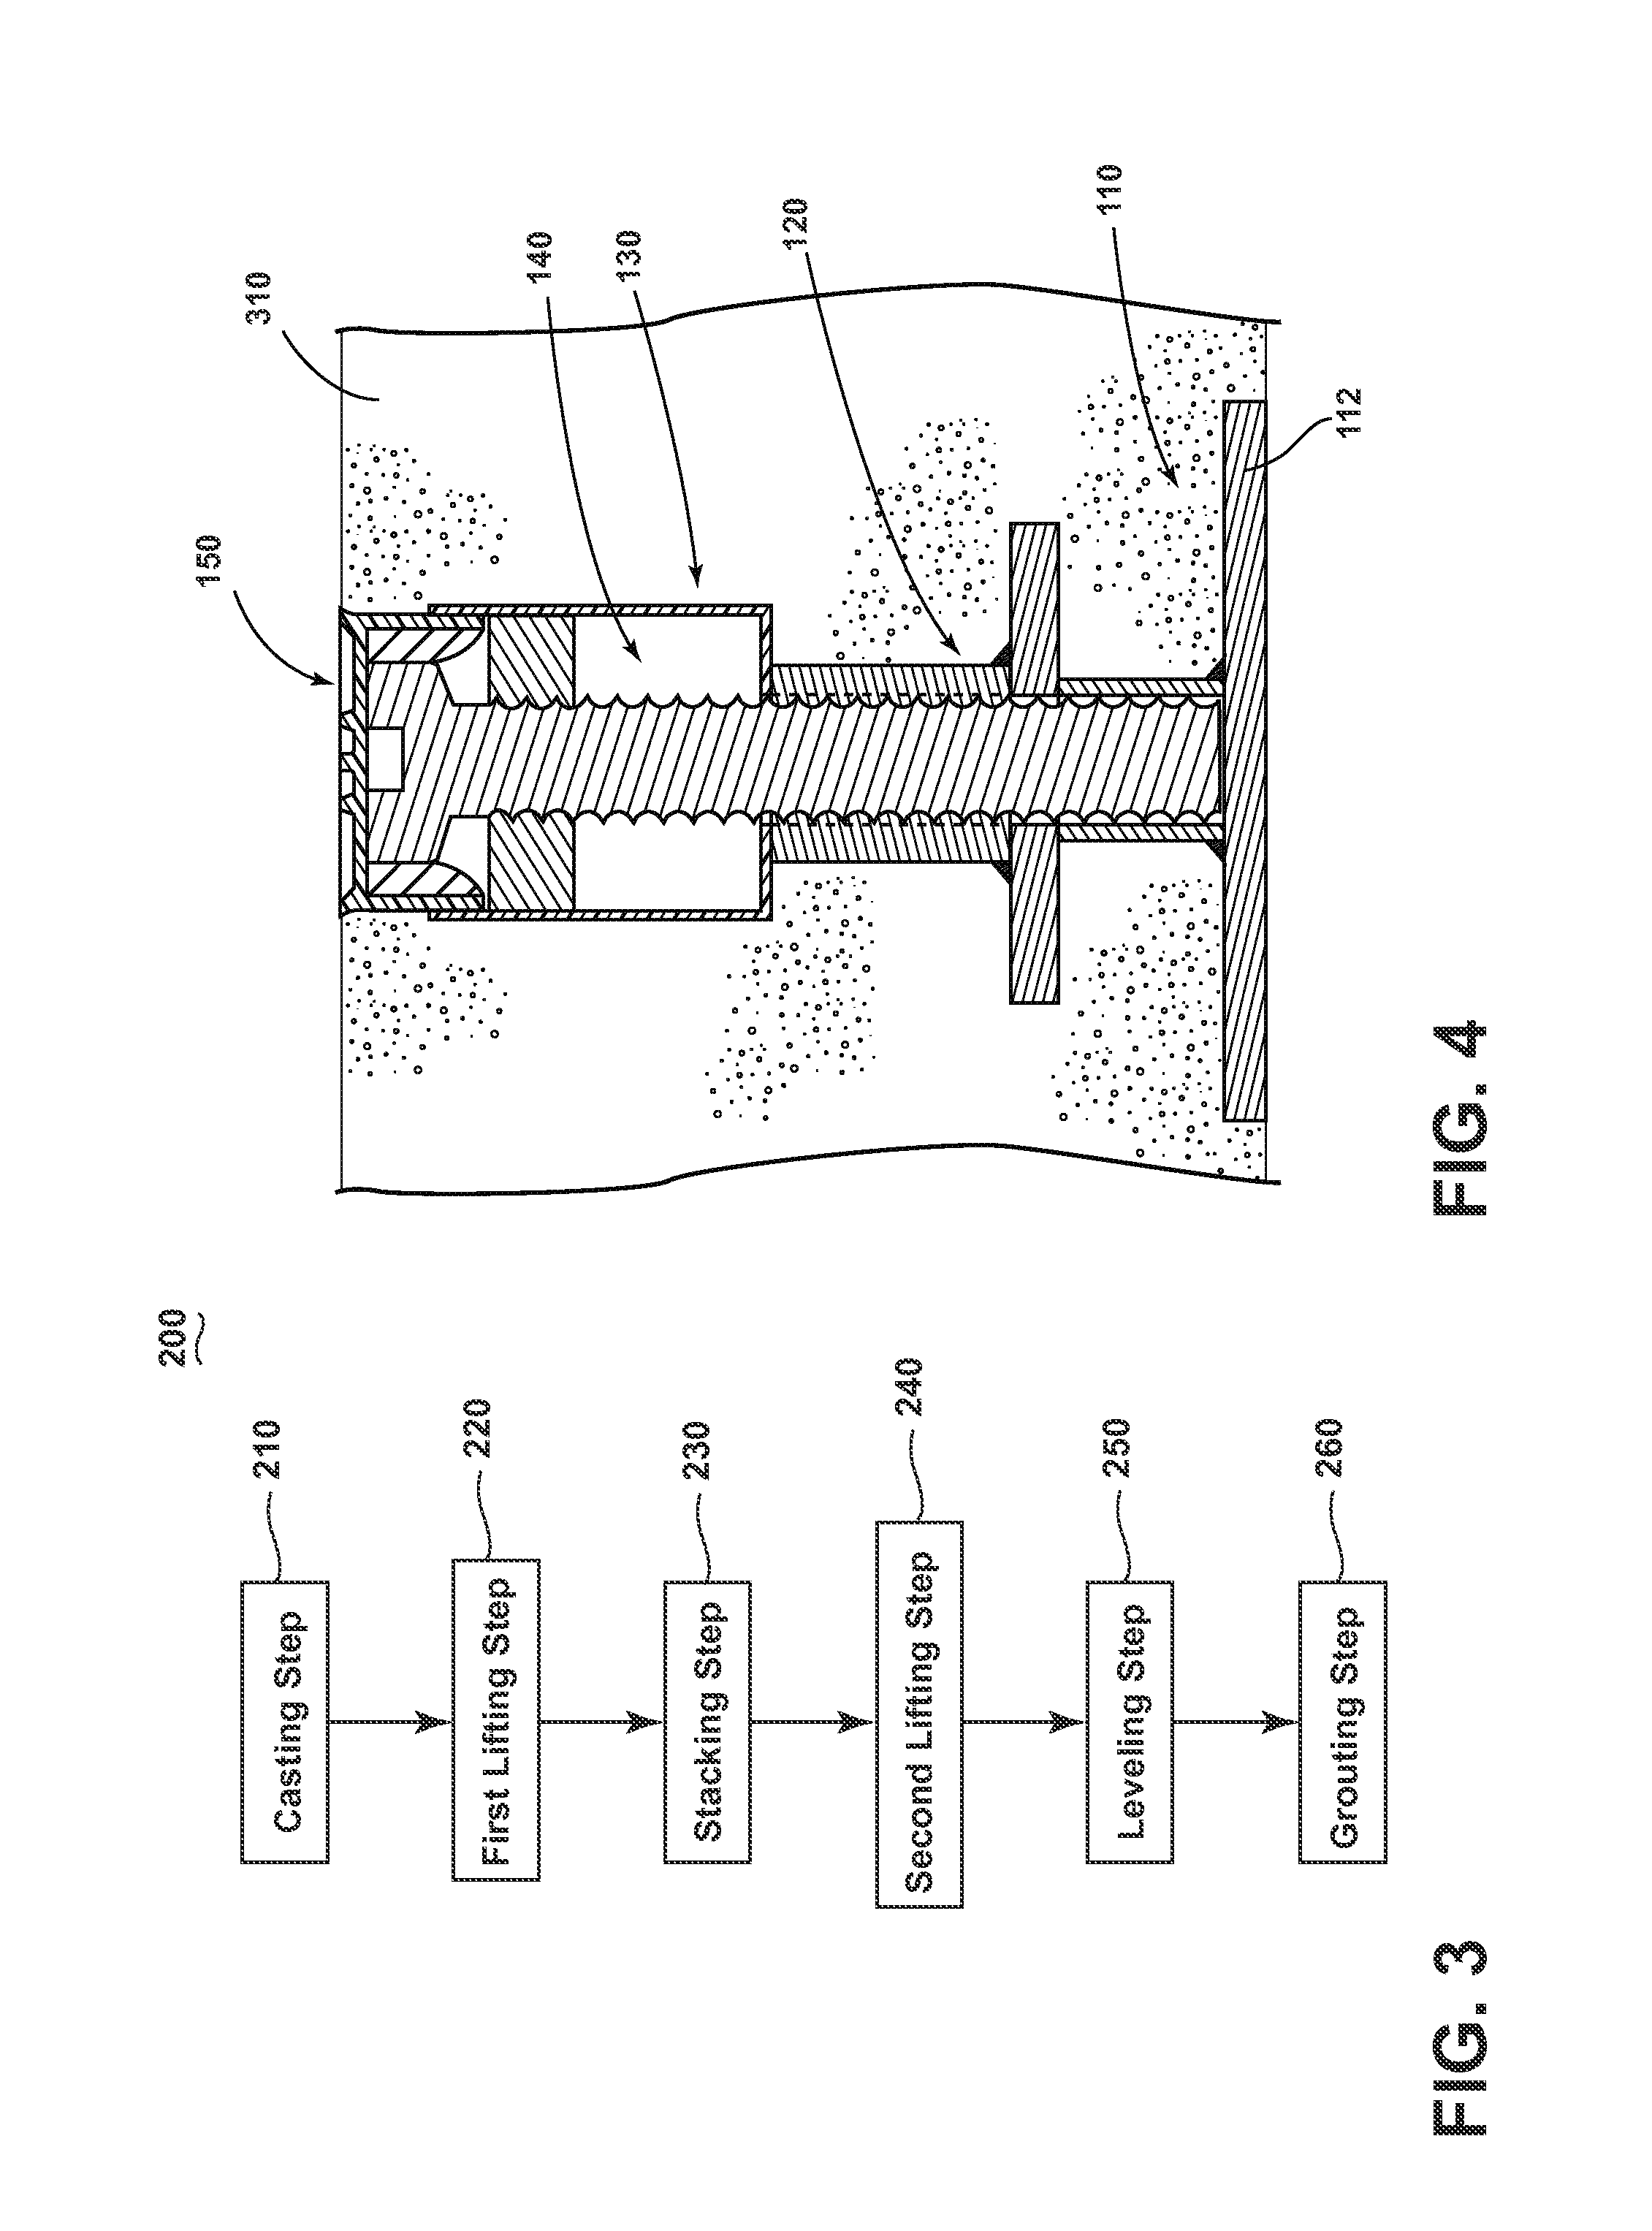 Lifting and leveling assembly for precast concrete slabs and method